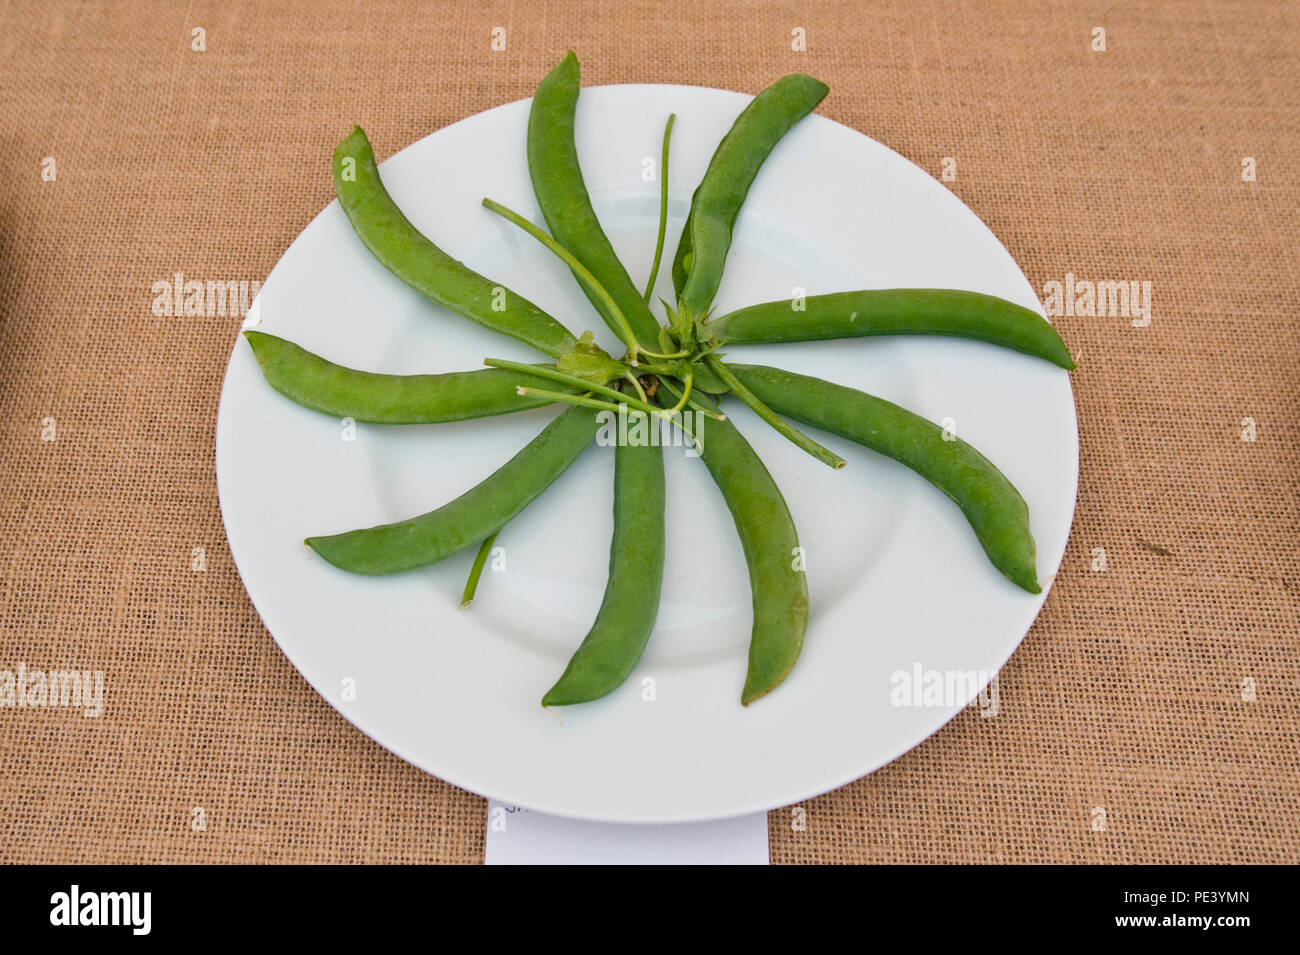 Plate of peas exhibited at RHS Tatton Park flower show Cheshire England UK Stock Photo